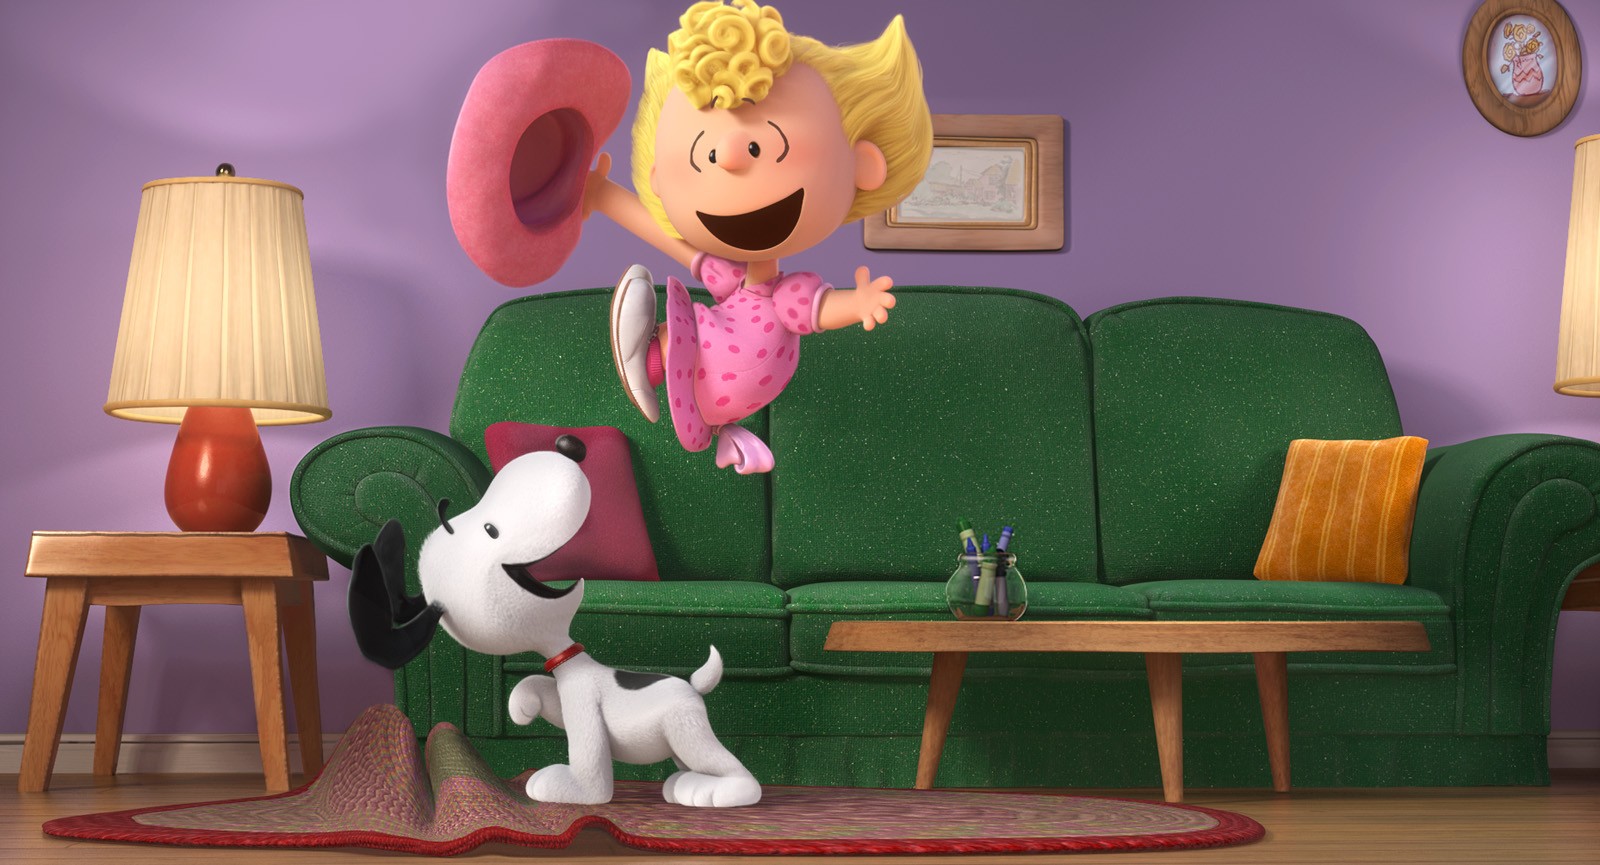 Sally Brown from 20th Century Fox's Peanuts (2015)